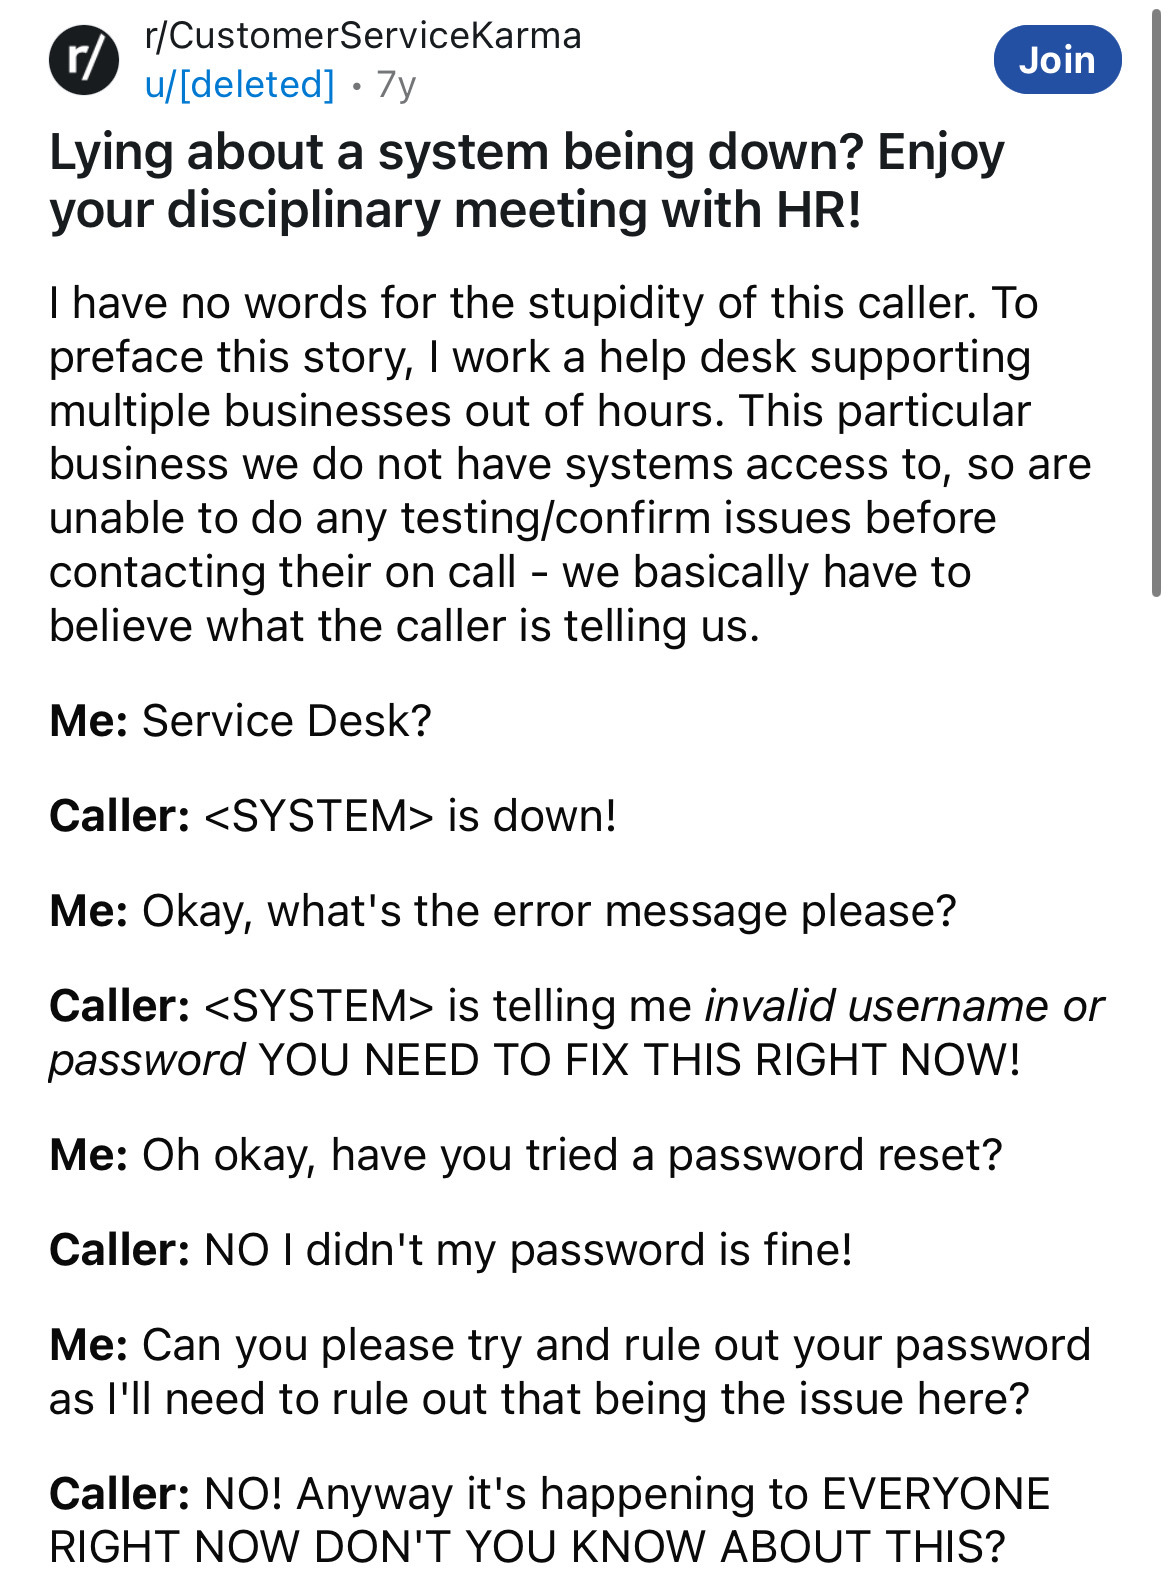 document - rCustomerServiceKarma r udeleted 7y . Lying about a system being down? Enjoy your disciplinary meeting with Hr! Join I have no words for the stupidity of this caller. To preface this story, I work a help desk supporting multiple businesses out 